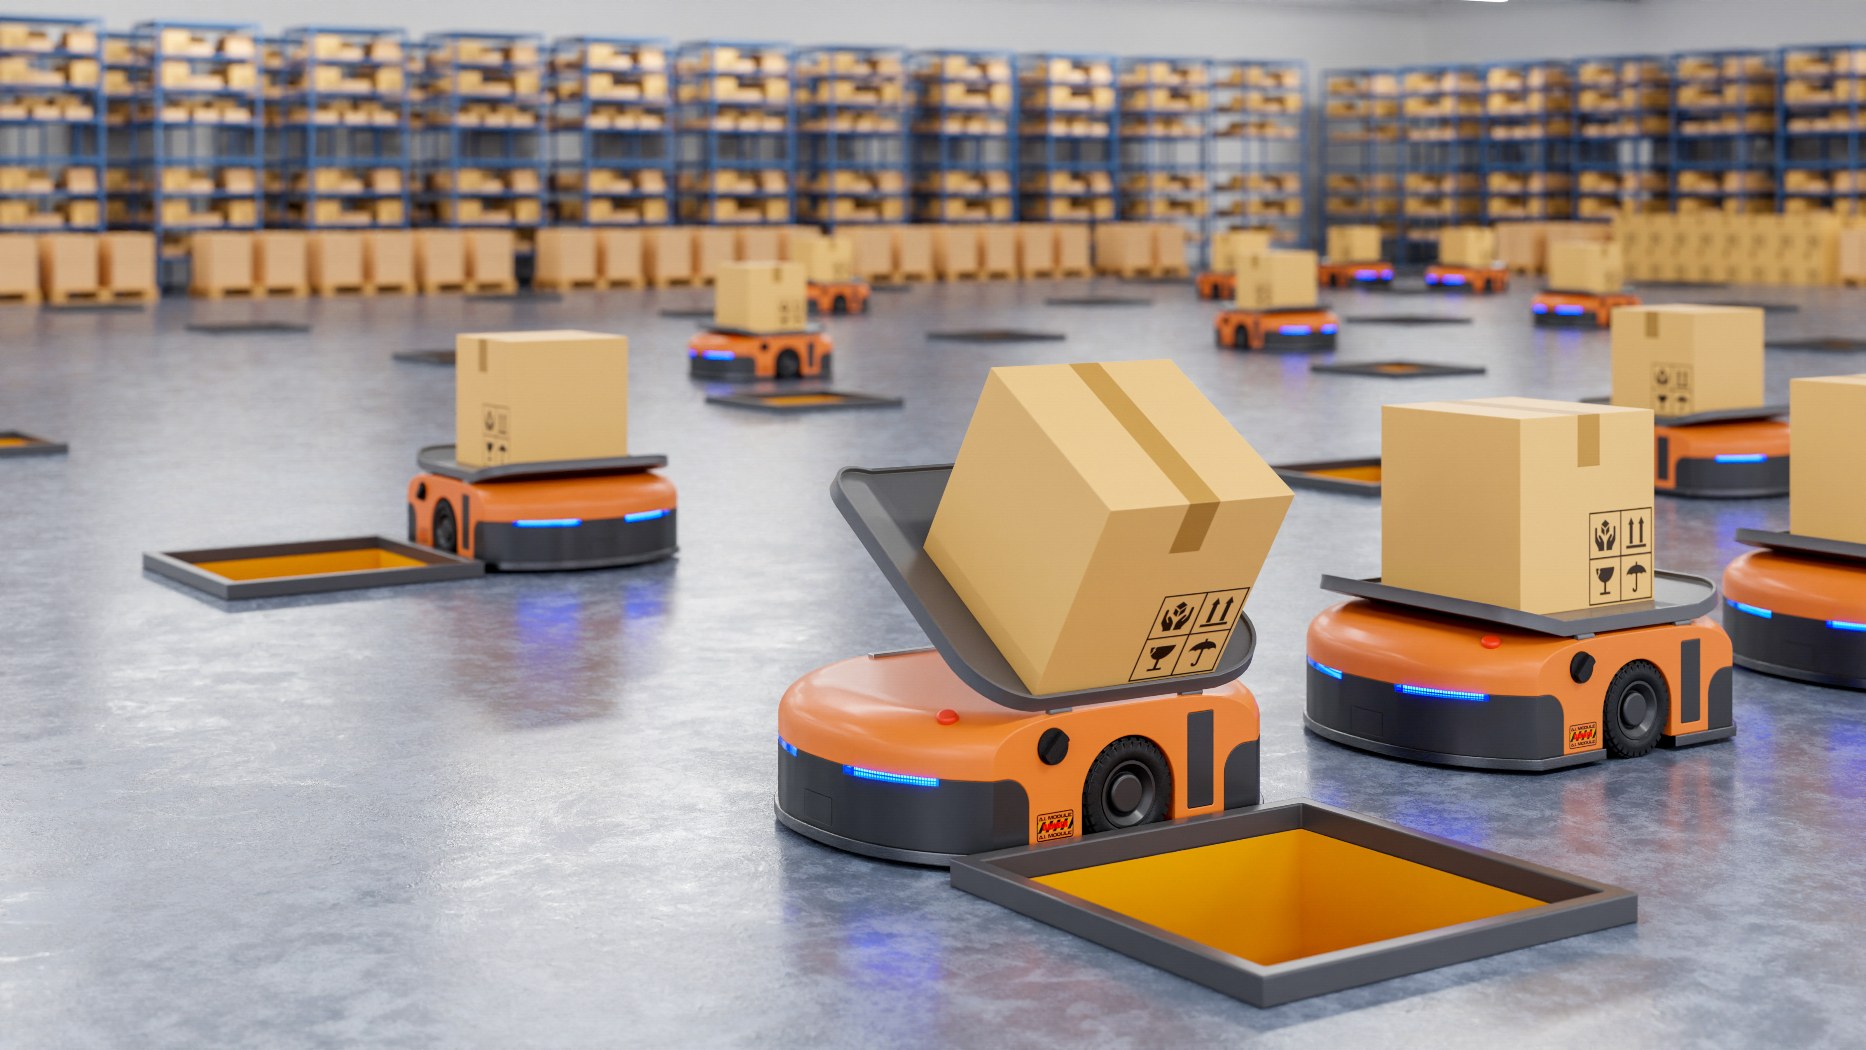 Amazon is implementing robots and hopes to reduce worker injuries